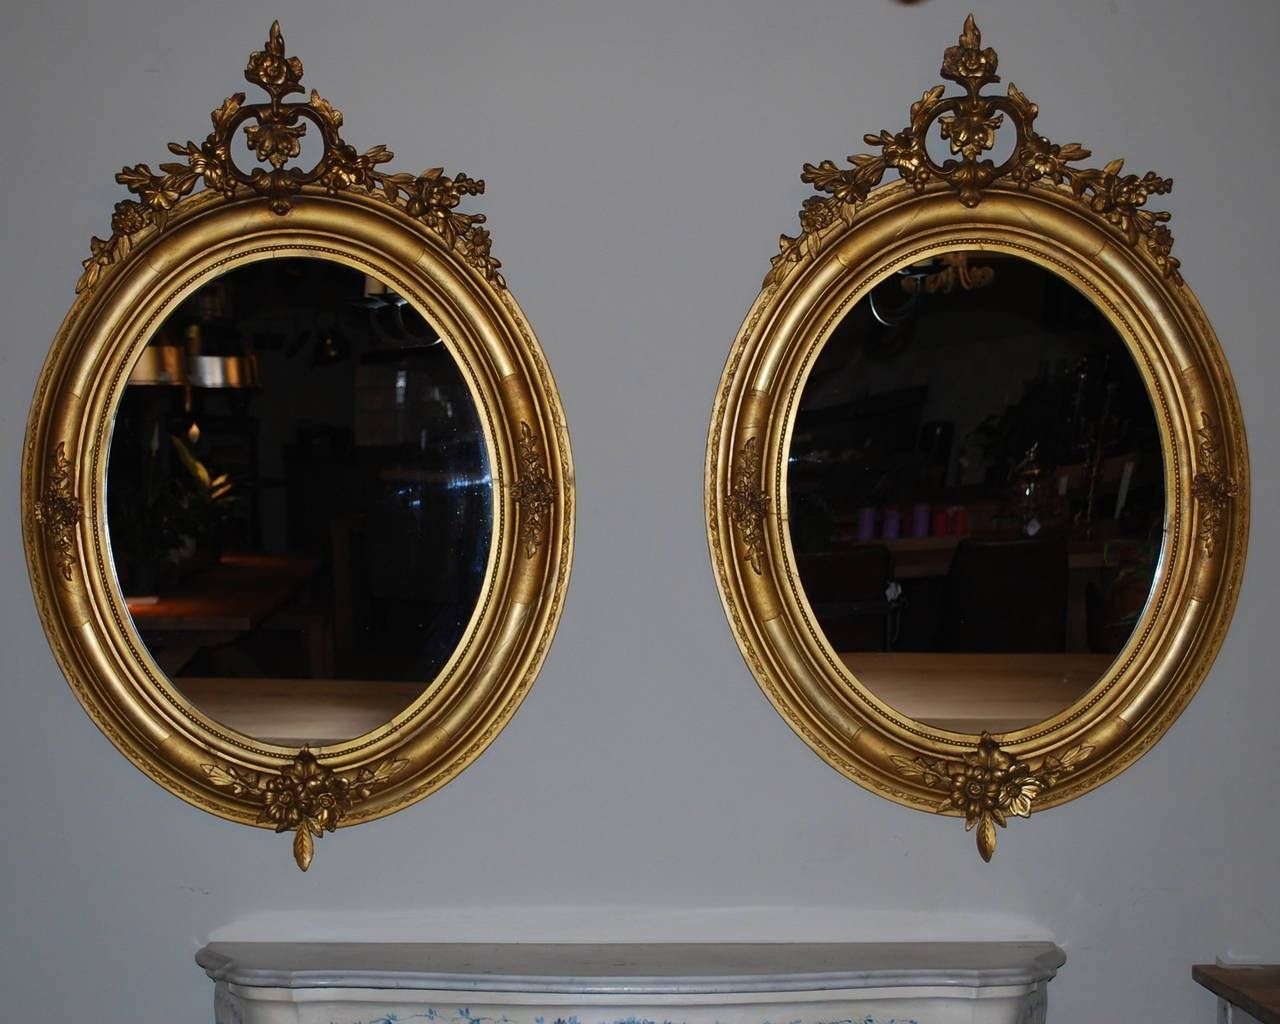 19th Century Pair Of Gold Gilded Oval Mirrors At 1stdibs Intended For Gilded Mirrors (View 16 of 25)